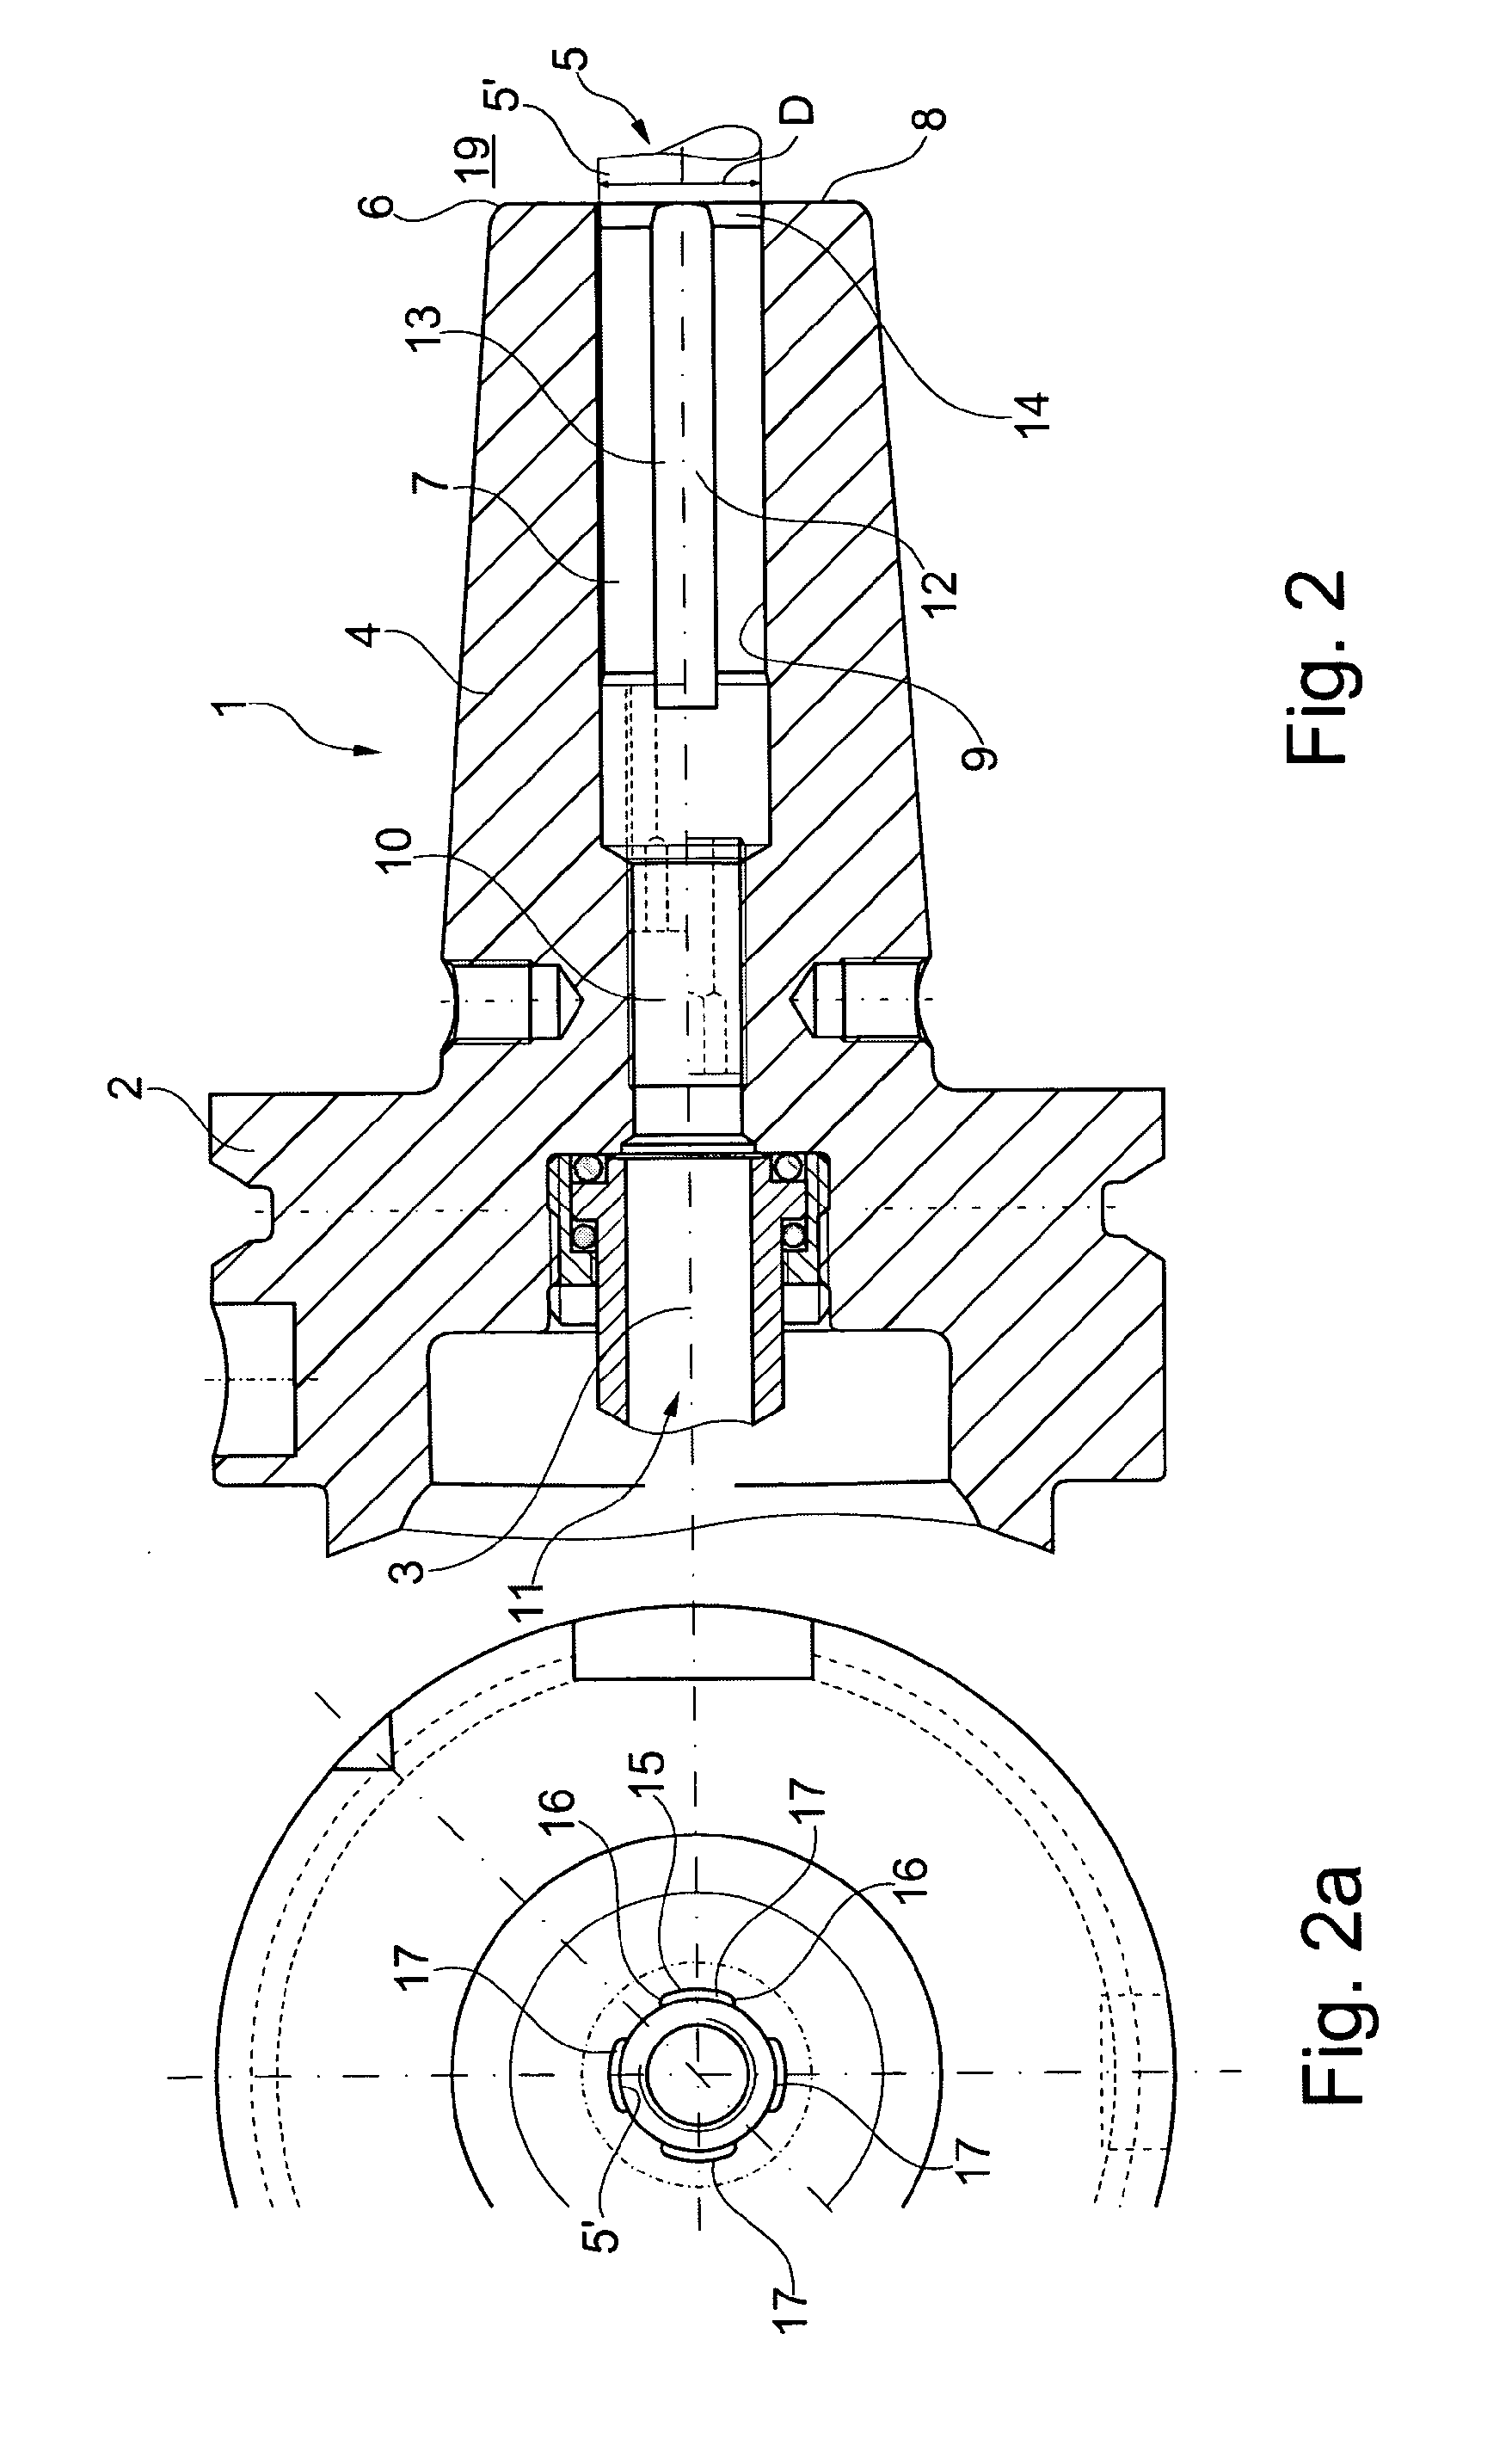 Tool holding device